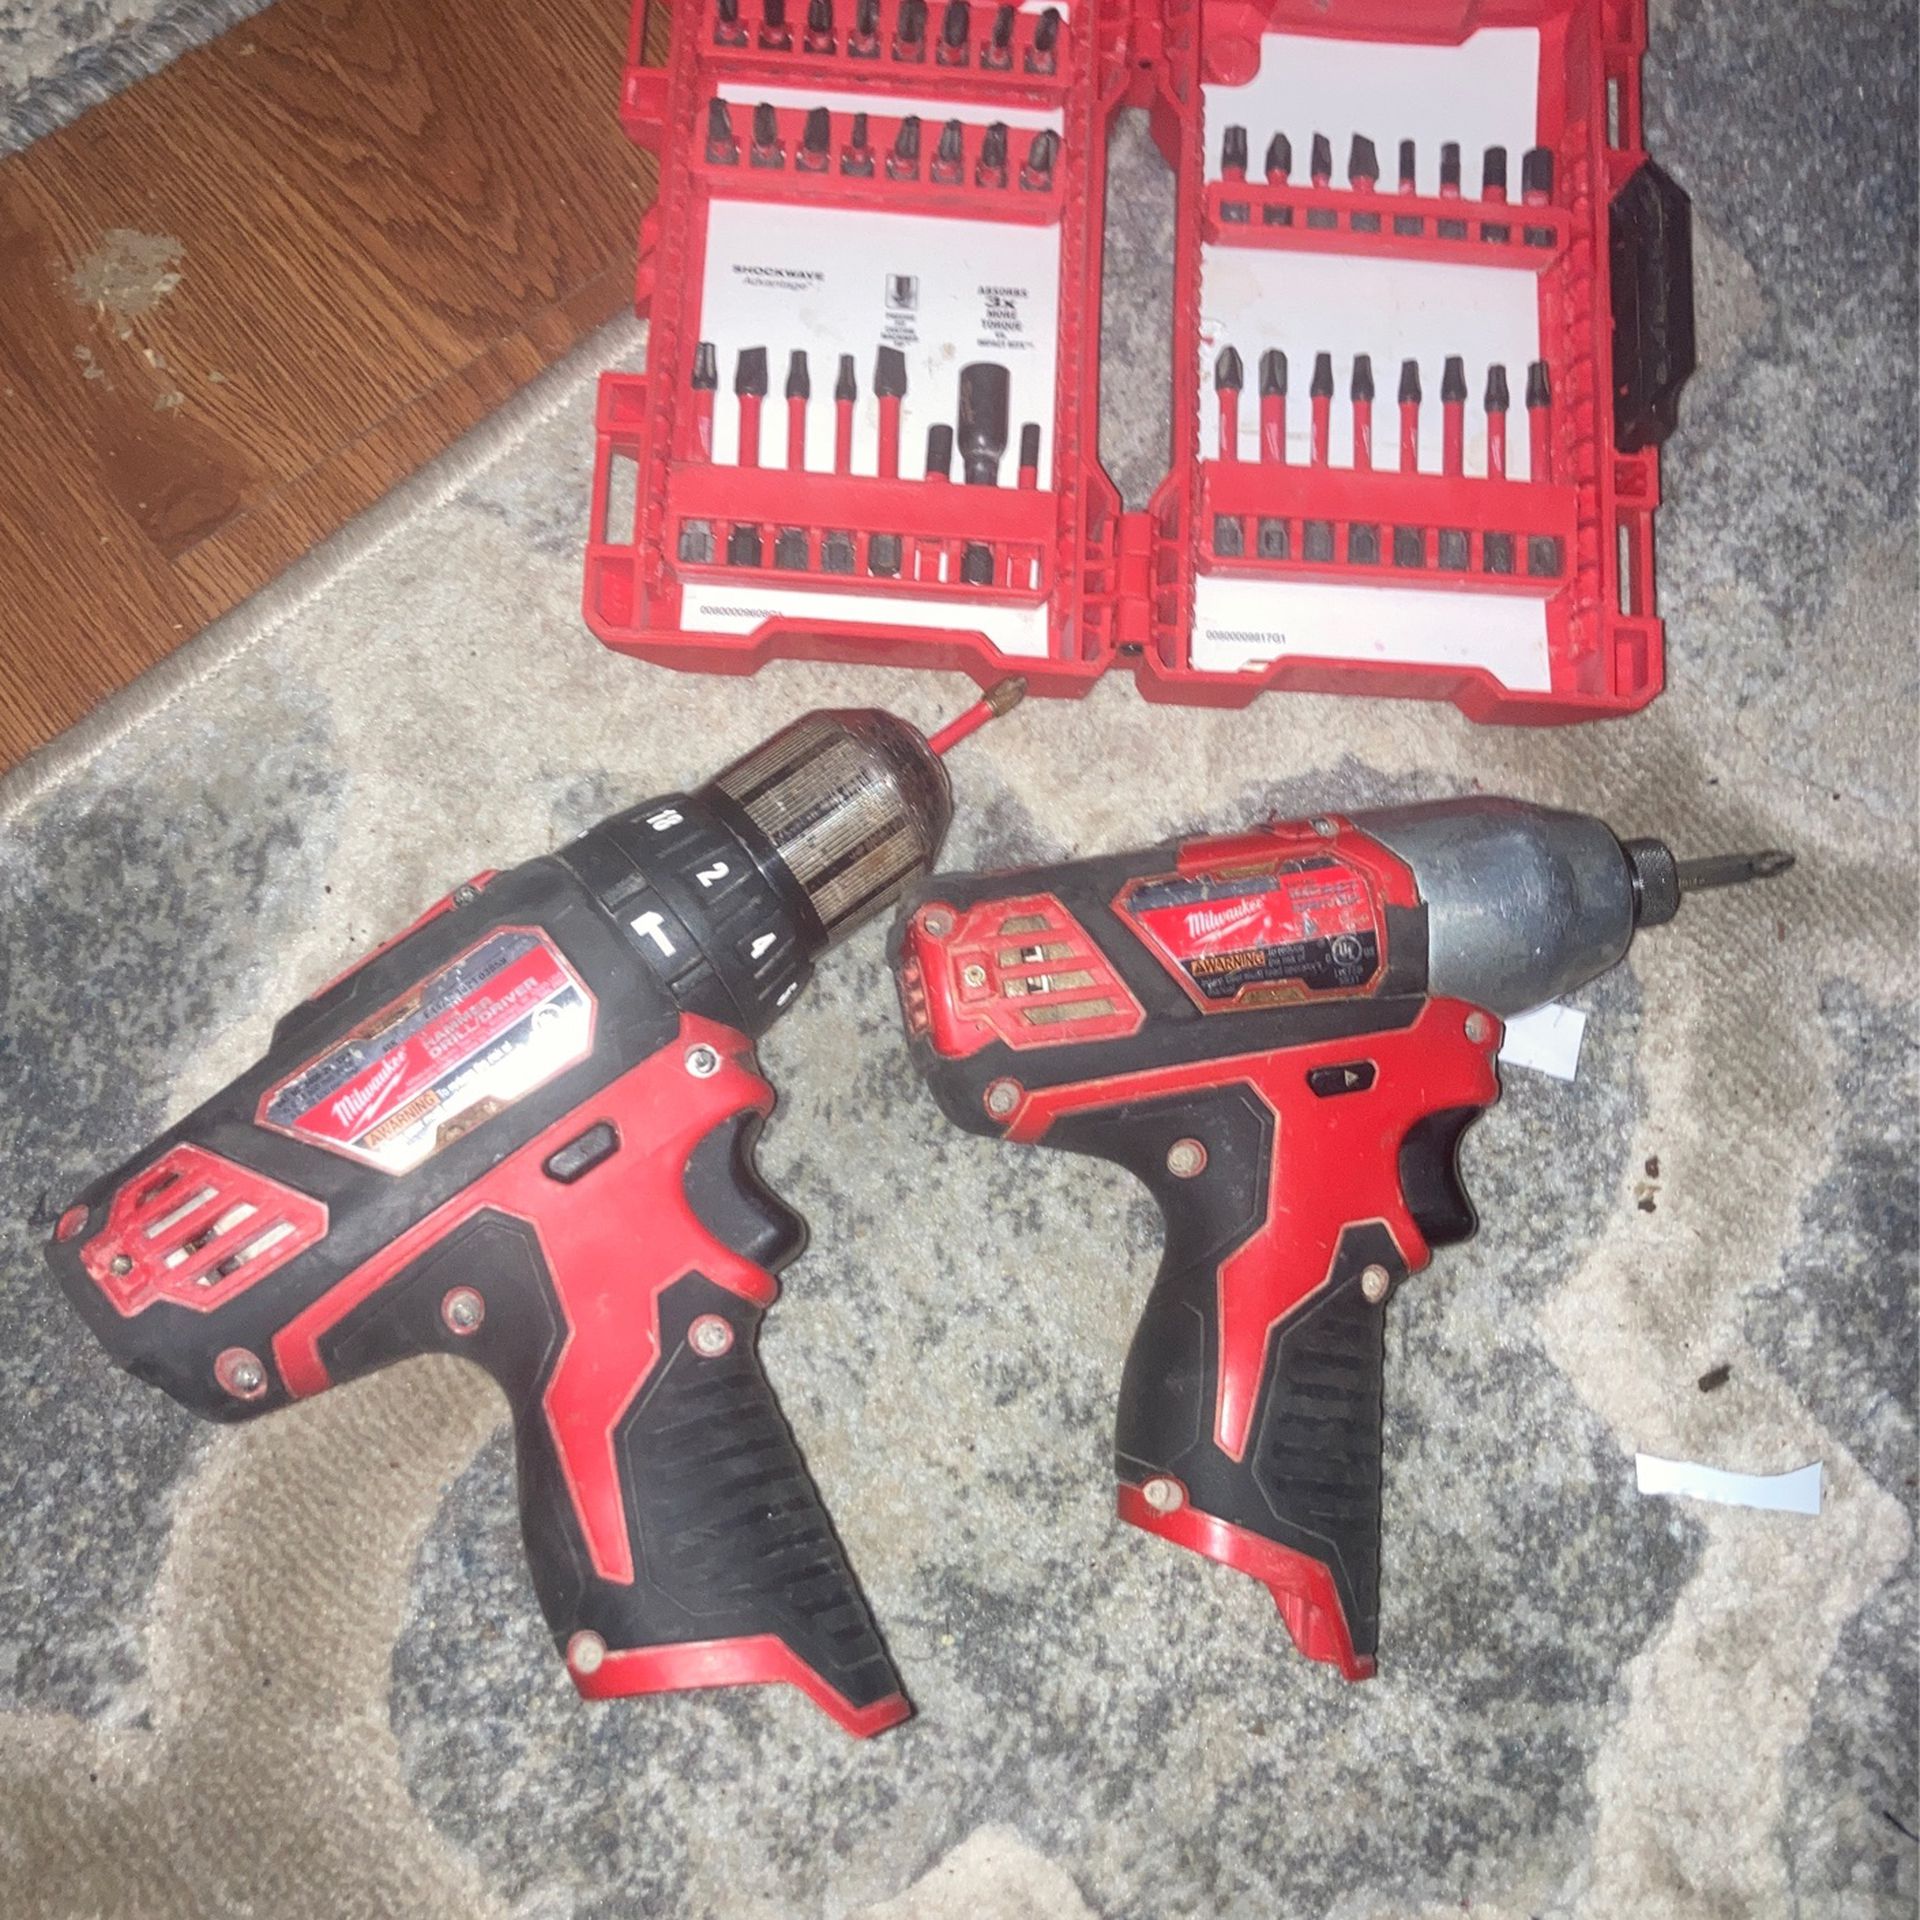 Milwaukee Drill Combo!!! Impact Driver And Hammer Drill/driver With Shockwave Bit Box